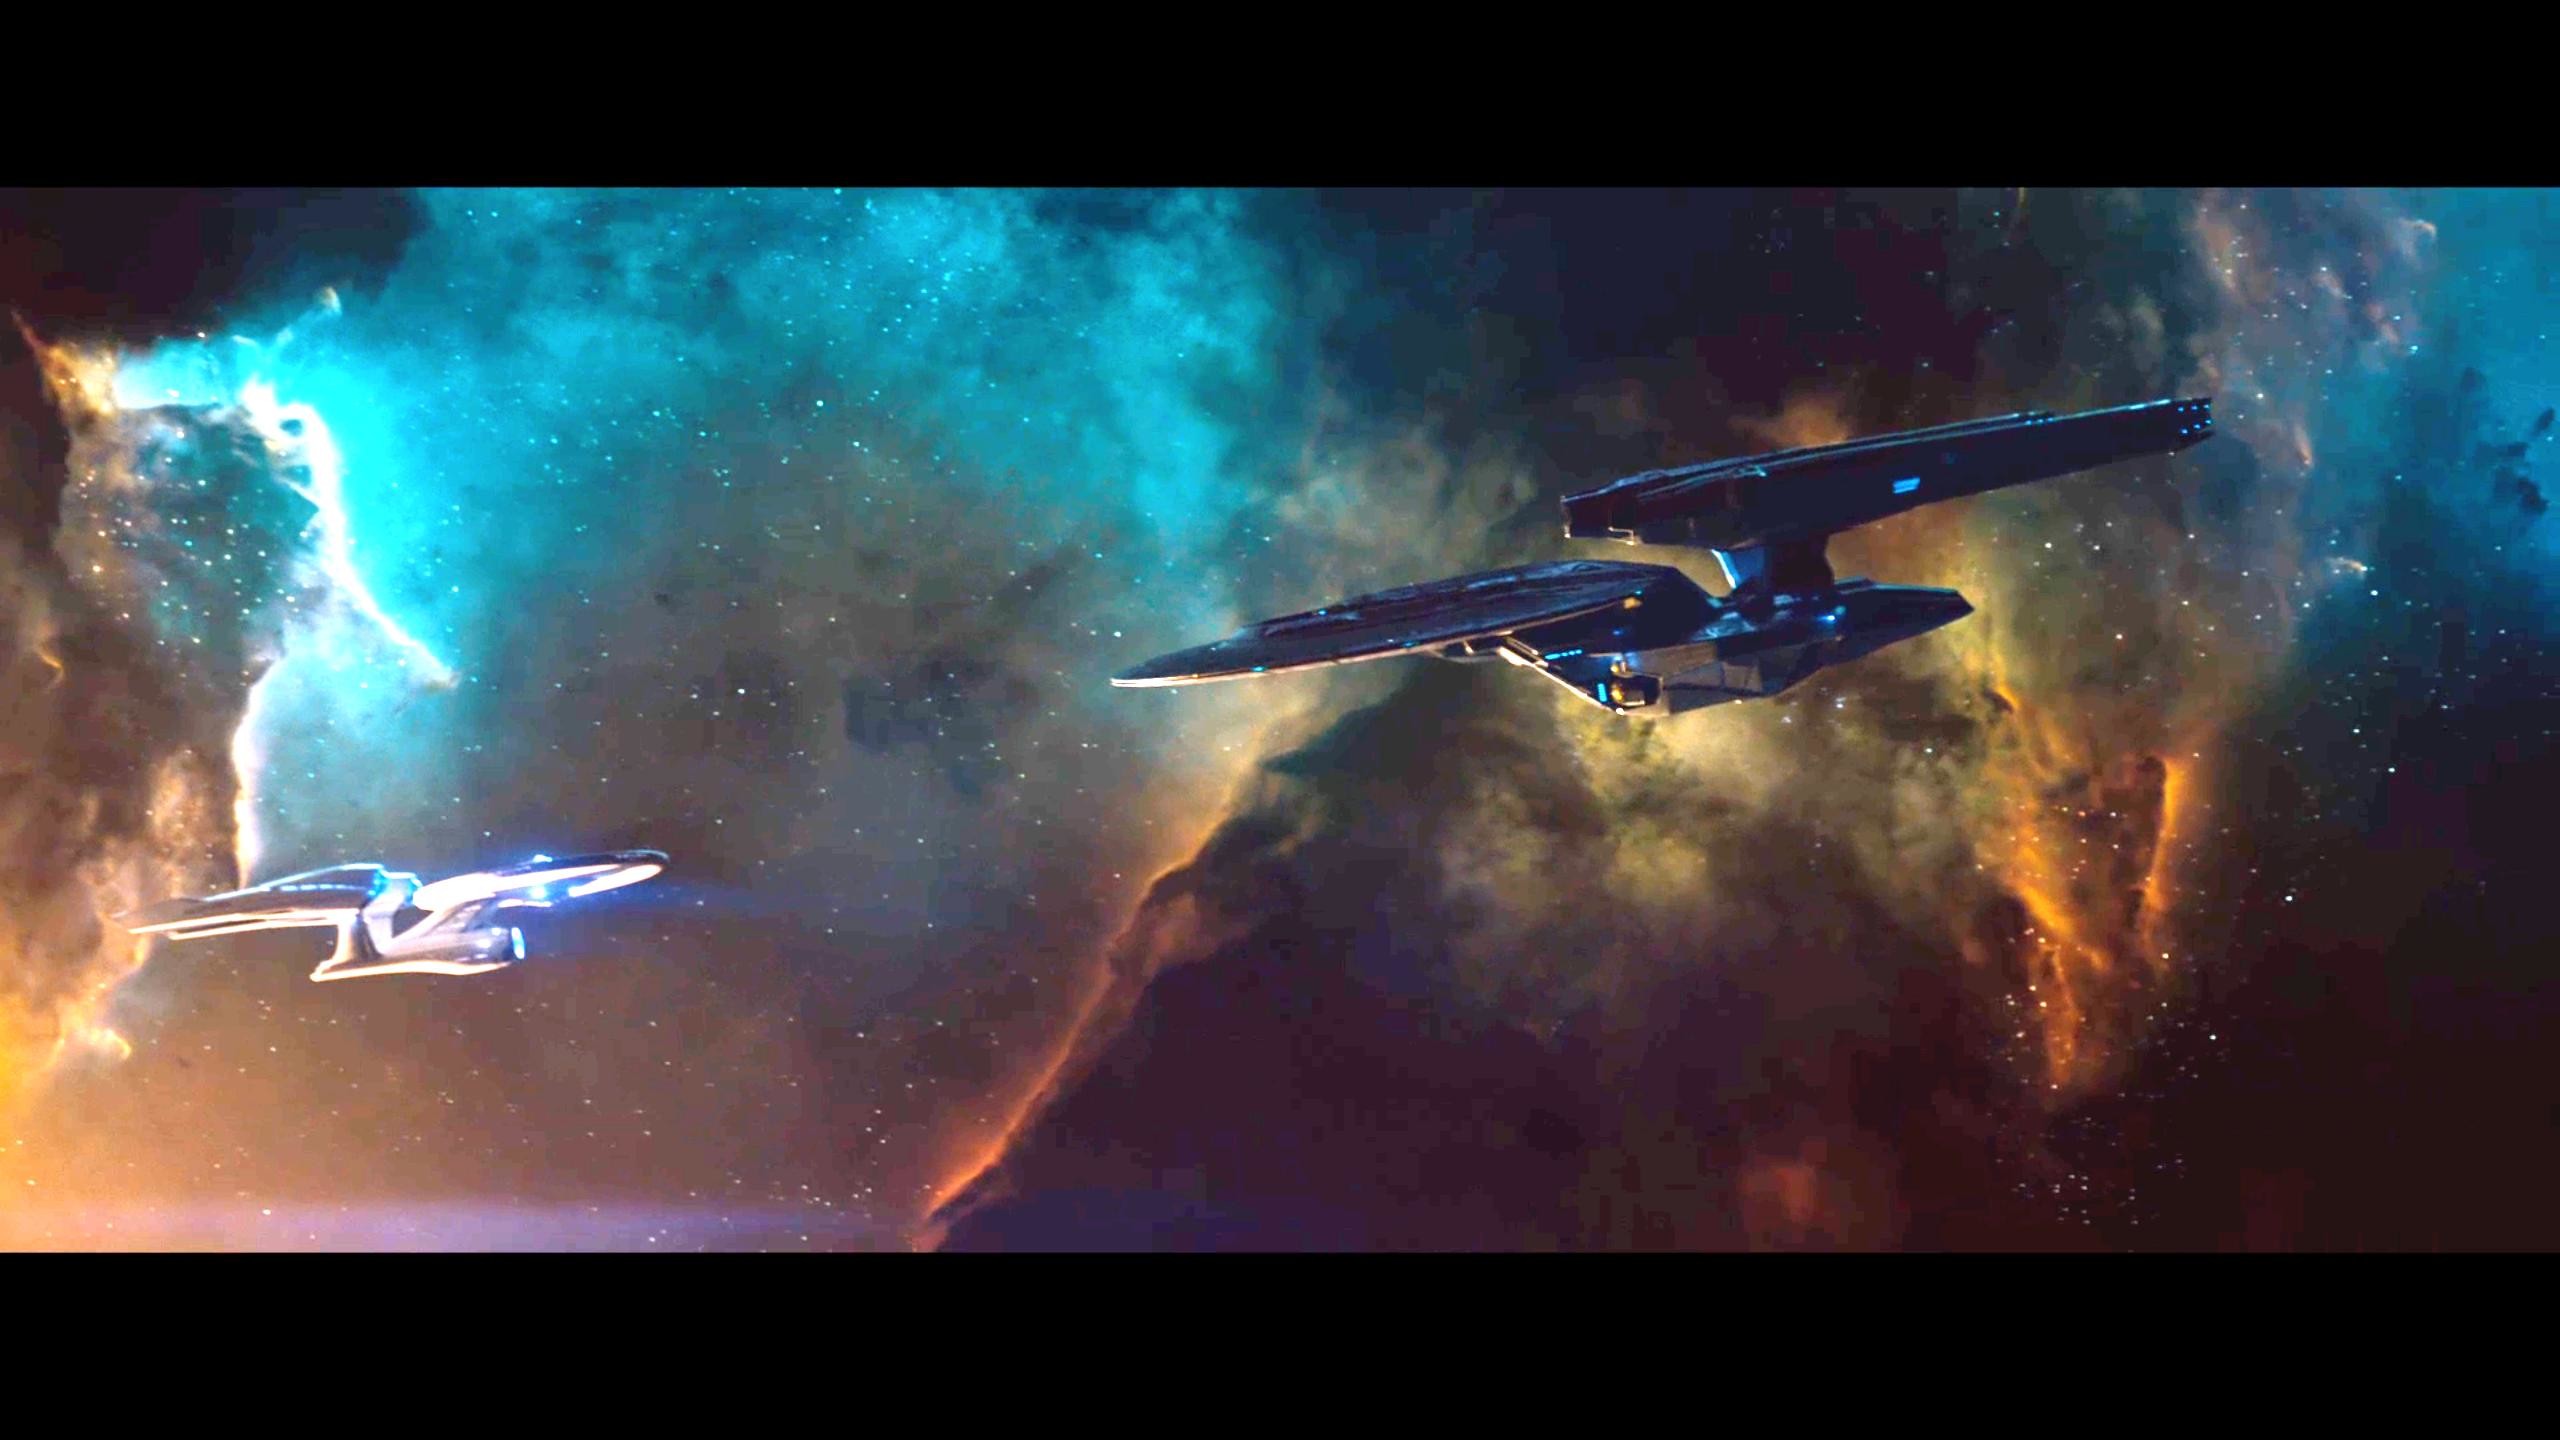 2560x1440 Star Trek Wallpapers Pack Download - Wallpapers and Pictures Gallery for PC  & Mac, Laptop, Tablet, Mobile Phone